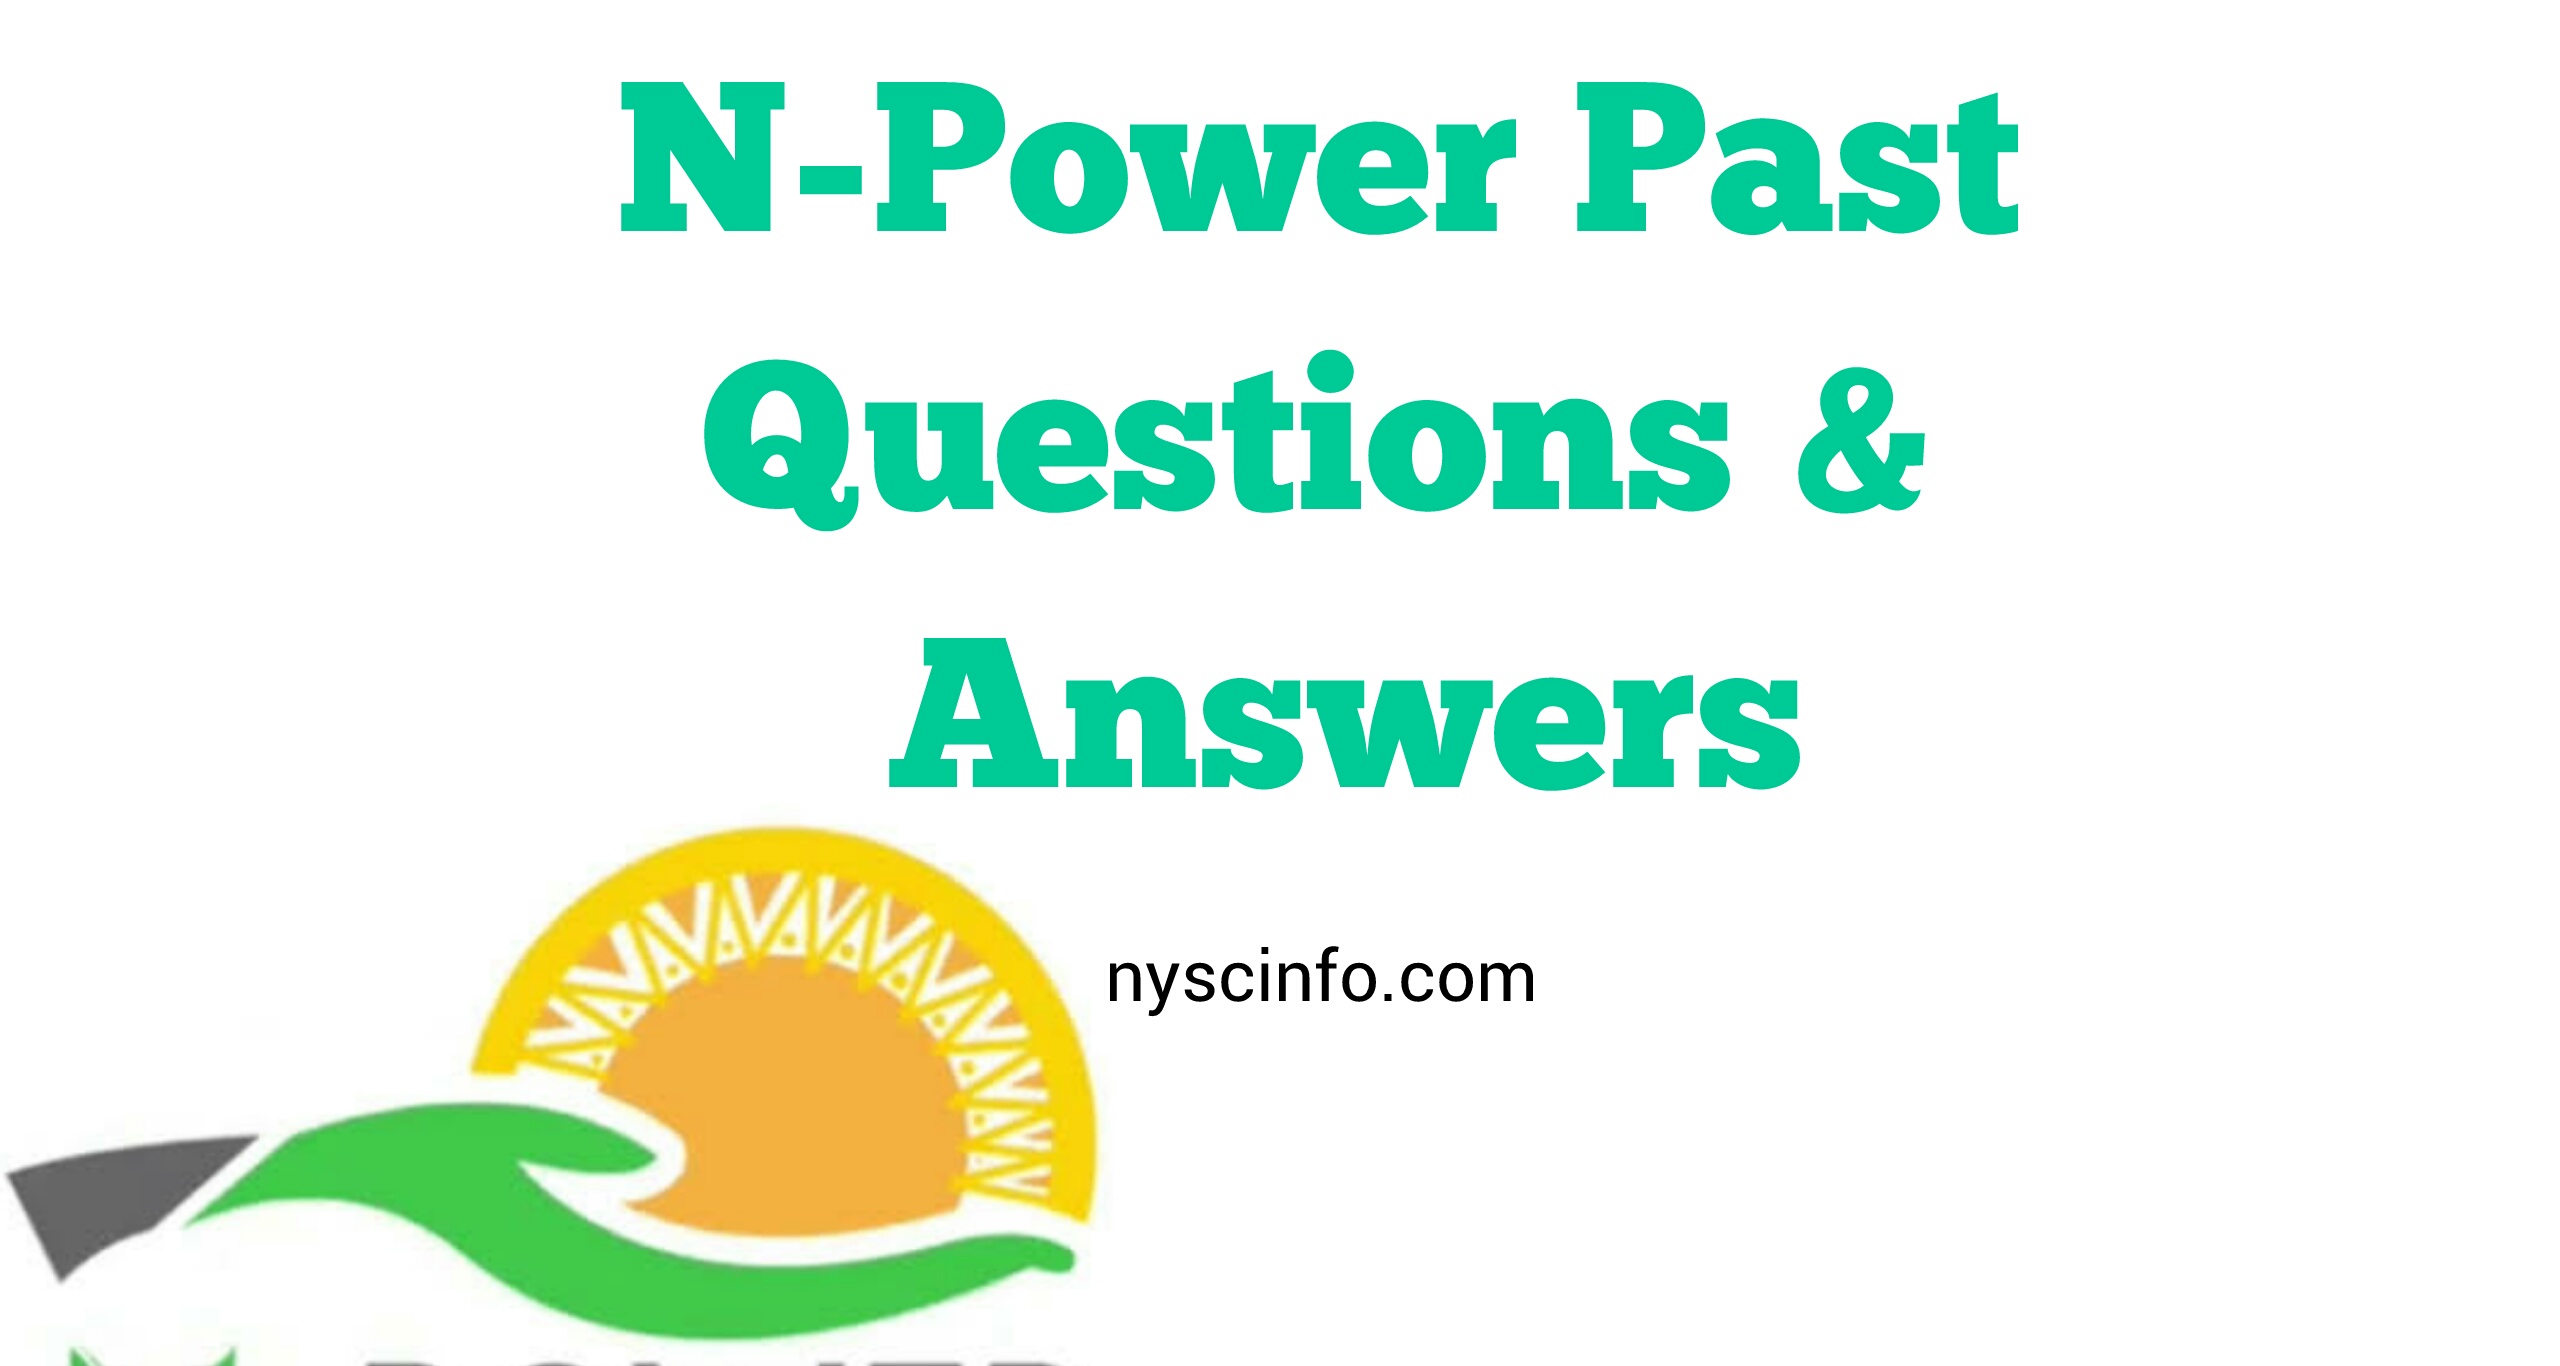 NPower Past Questions and Answers